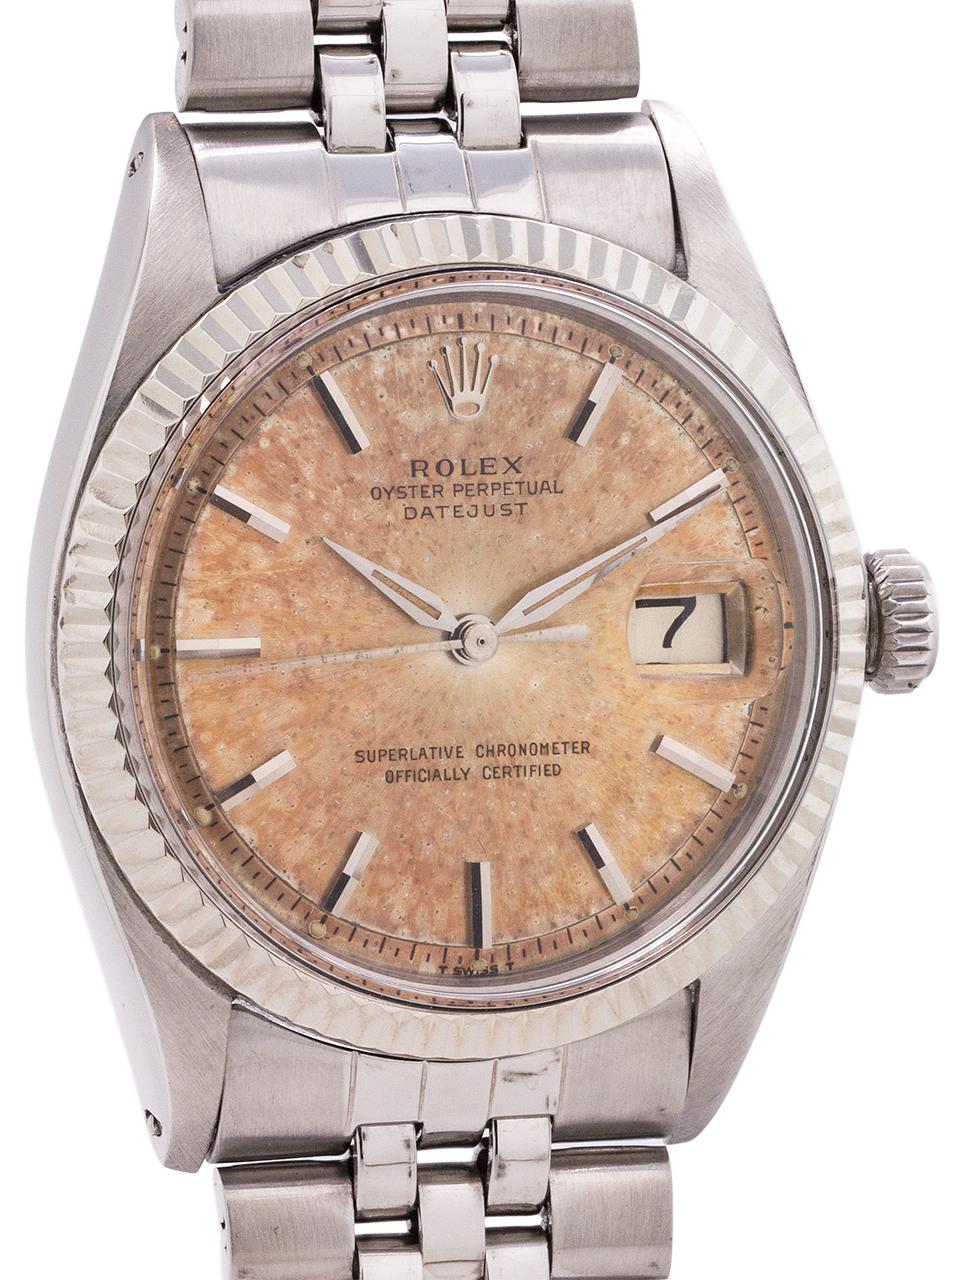 Rolex Stainless Steel Datejust ref 1601 serial # 8.9 million circa 1962. Full size man’s 36mm diameter case with 14K white gold fluted bezel and acrylic crystal with a richly patina’d “Tropical Peach” colored dial. With stick indexes and with early